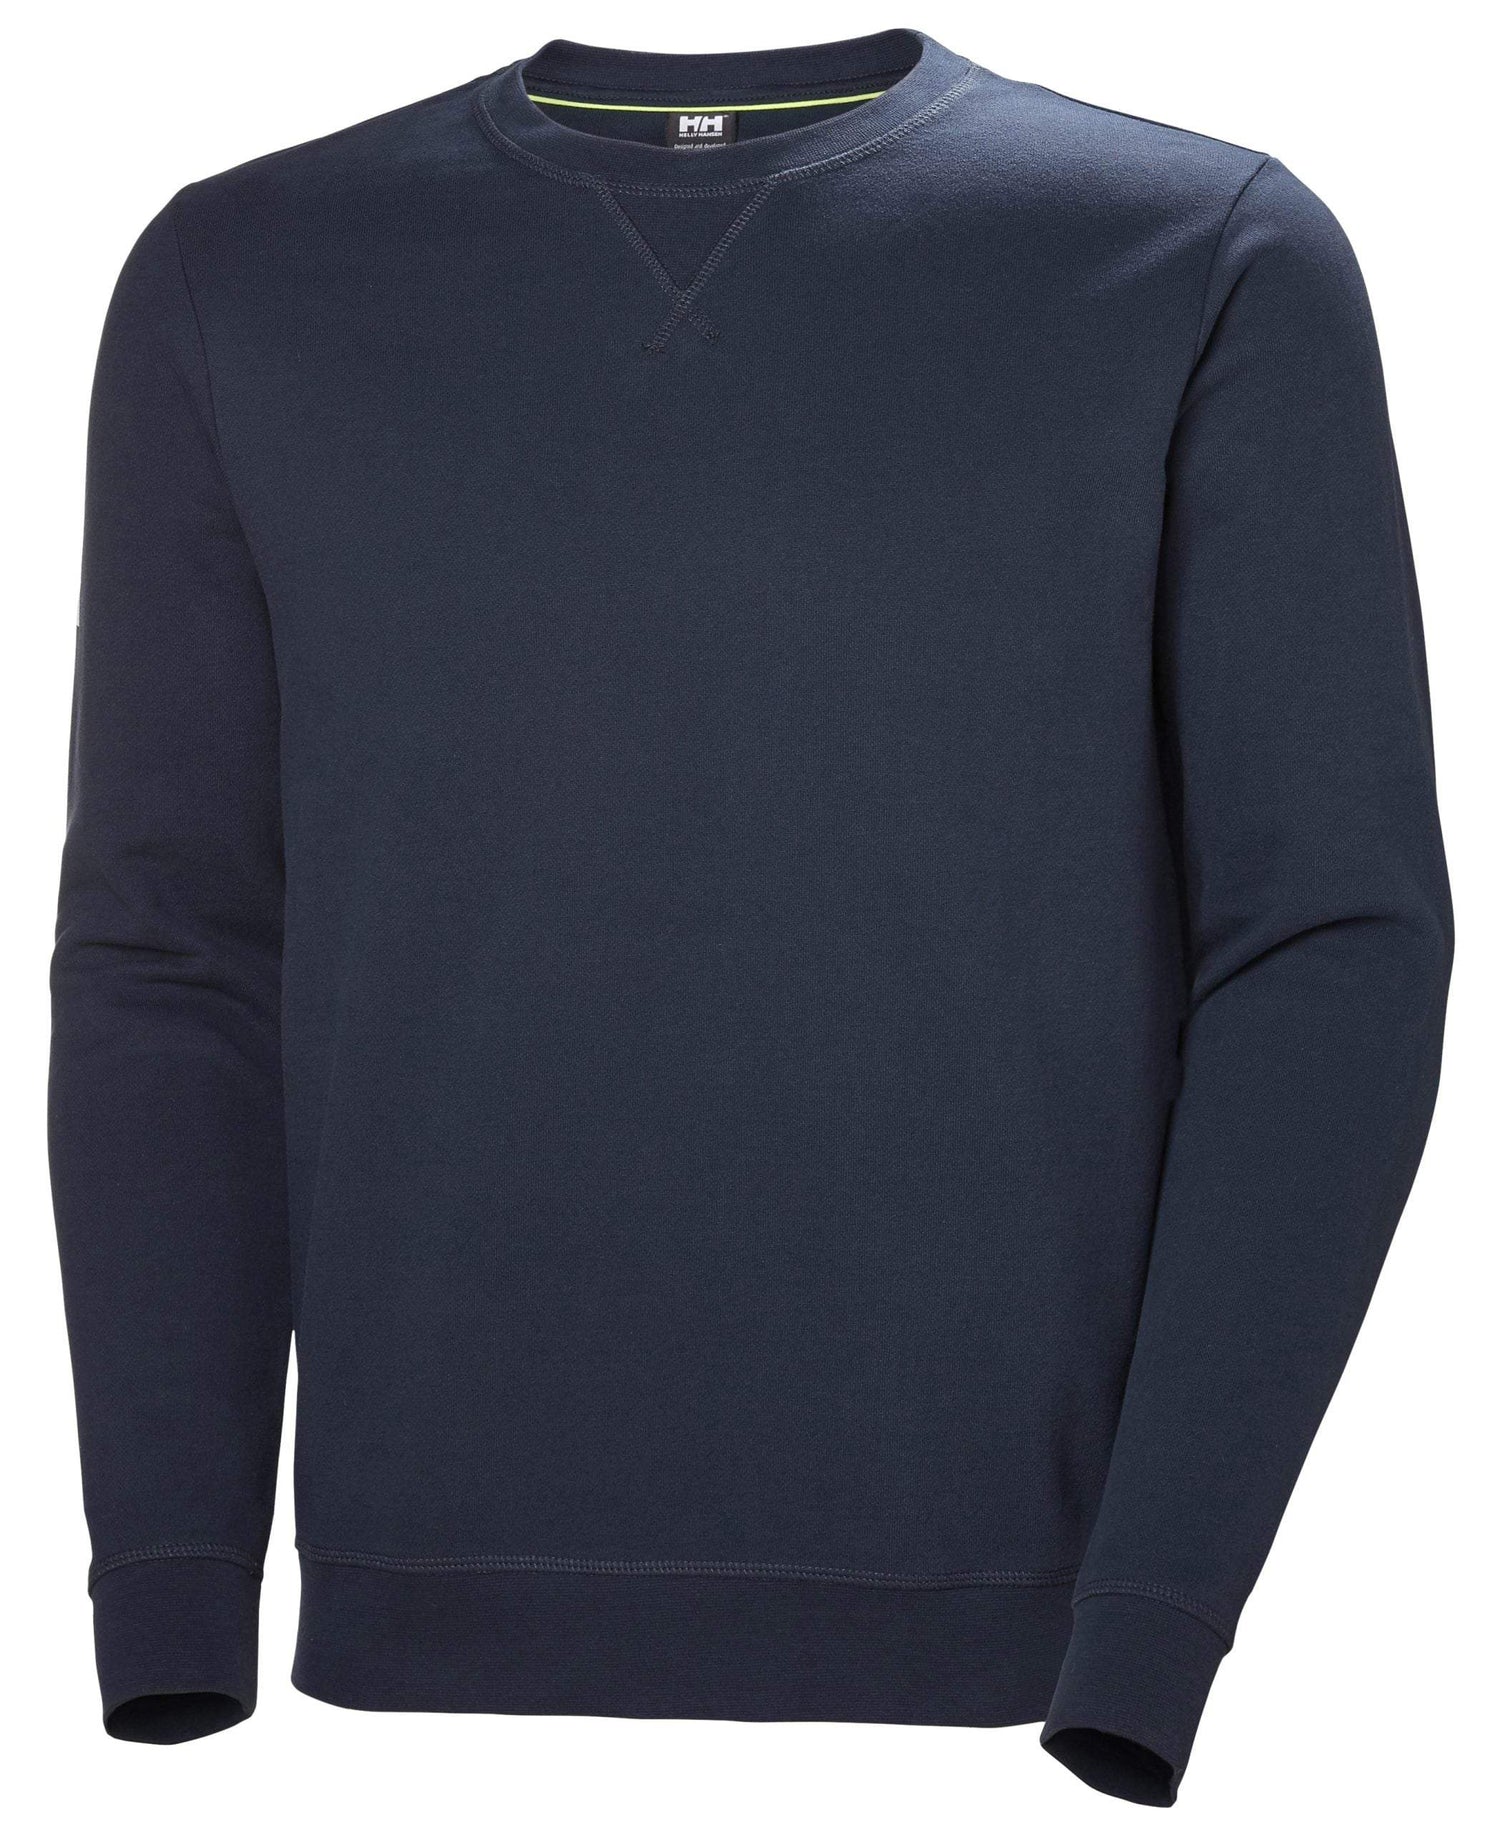 Helly Hansen Men’s Crew Sweatshirt - The Luxury Promotional Gifts Company Limited